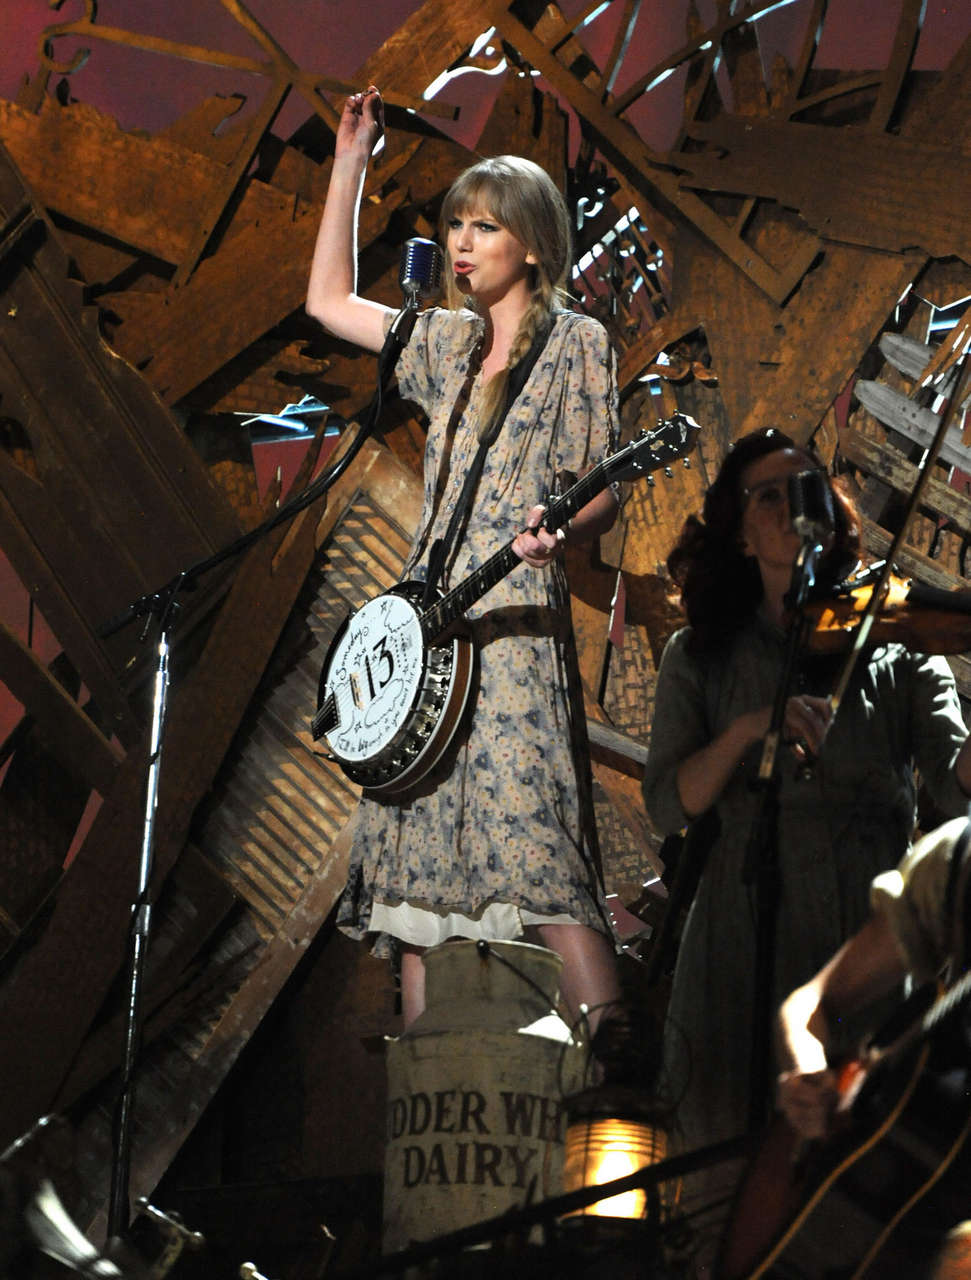 Taylor Swift 54th Annual Grammy Awards Los Angeles